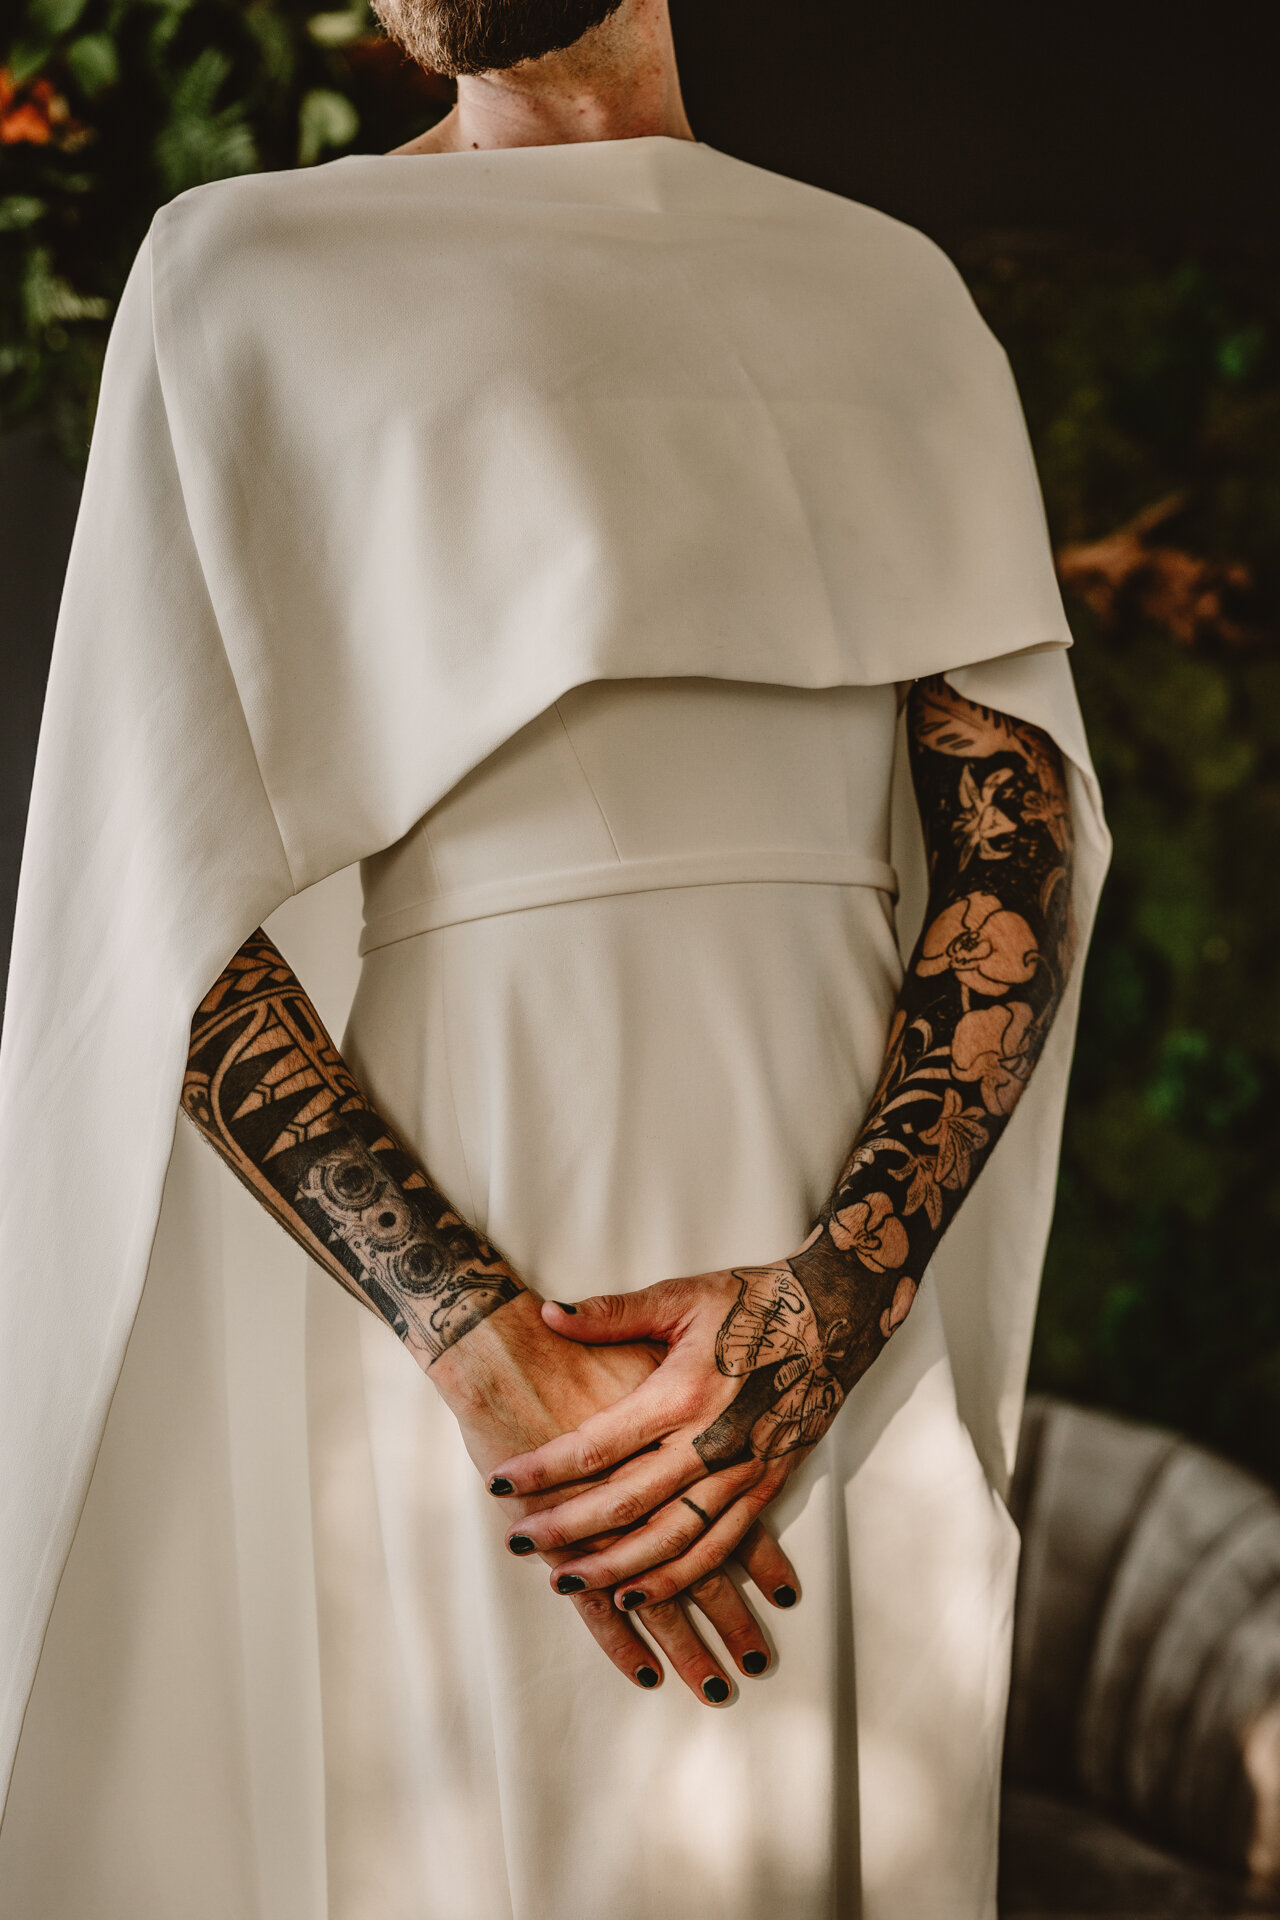  Lush + Leather intimate LGBTQIA+ styled shoot at Denver Photo Collective in the gorgeous Vagabond Zoe wedding gown and Eos cape photographed by Storih Photography 